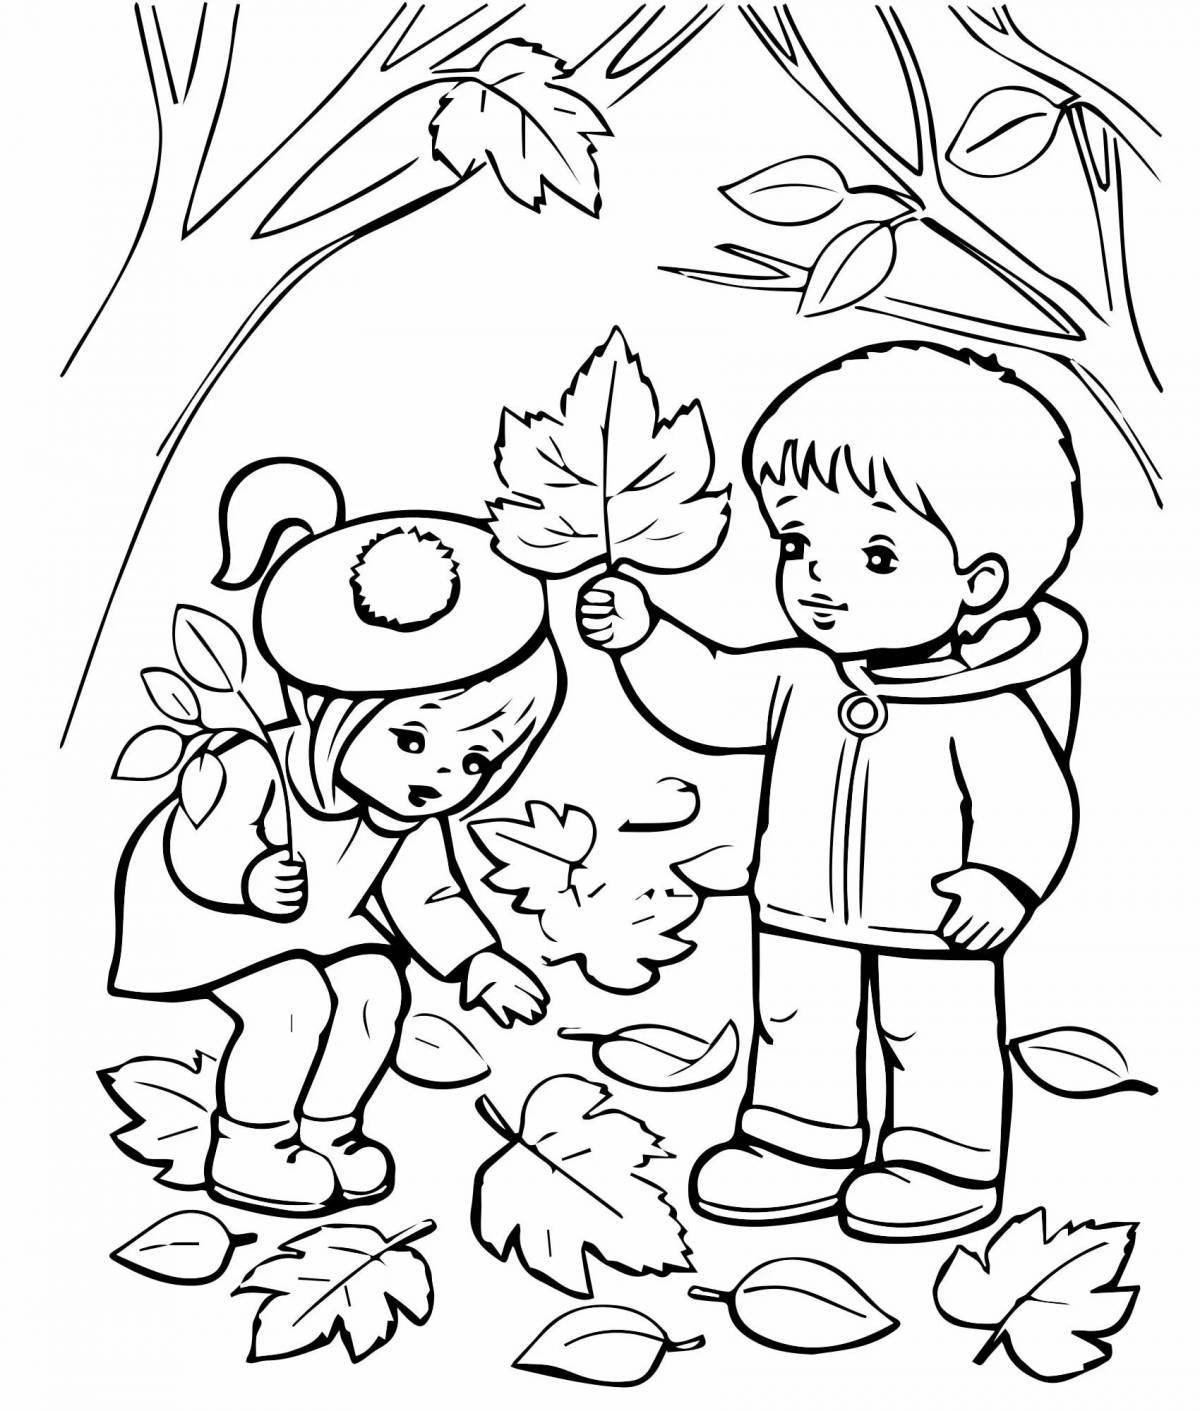 A playful autumn coloring book for 6-7 year olds